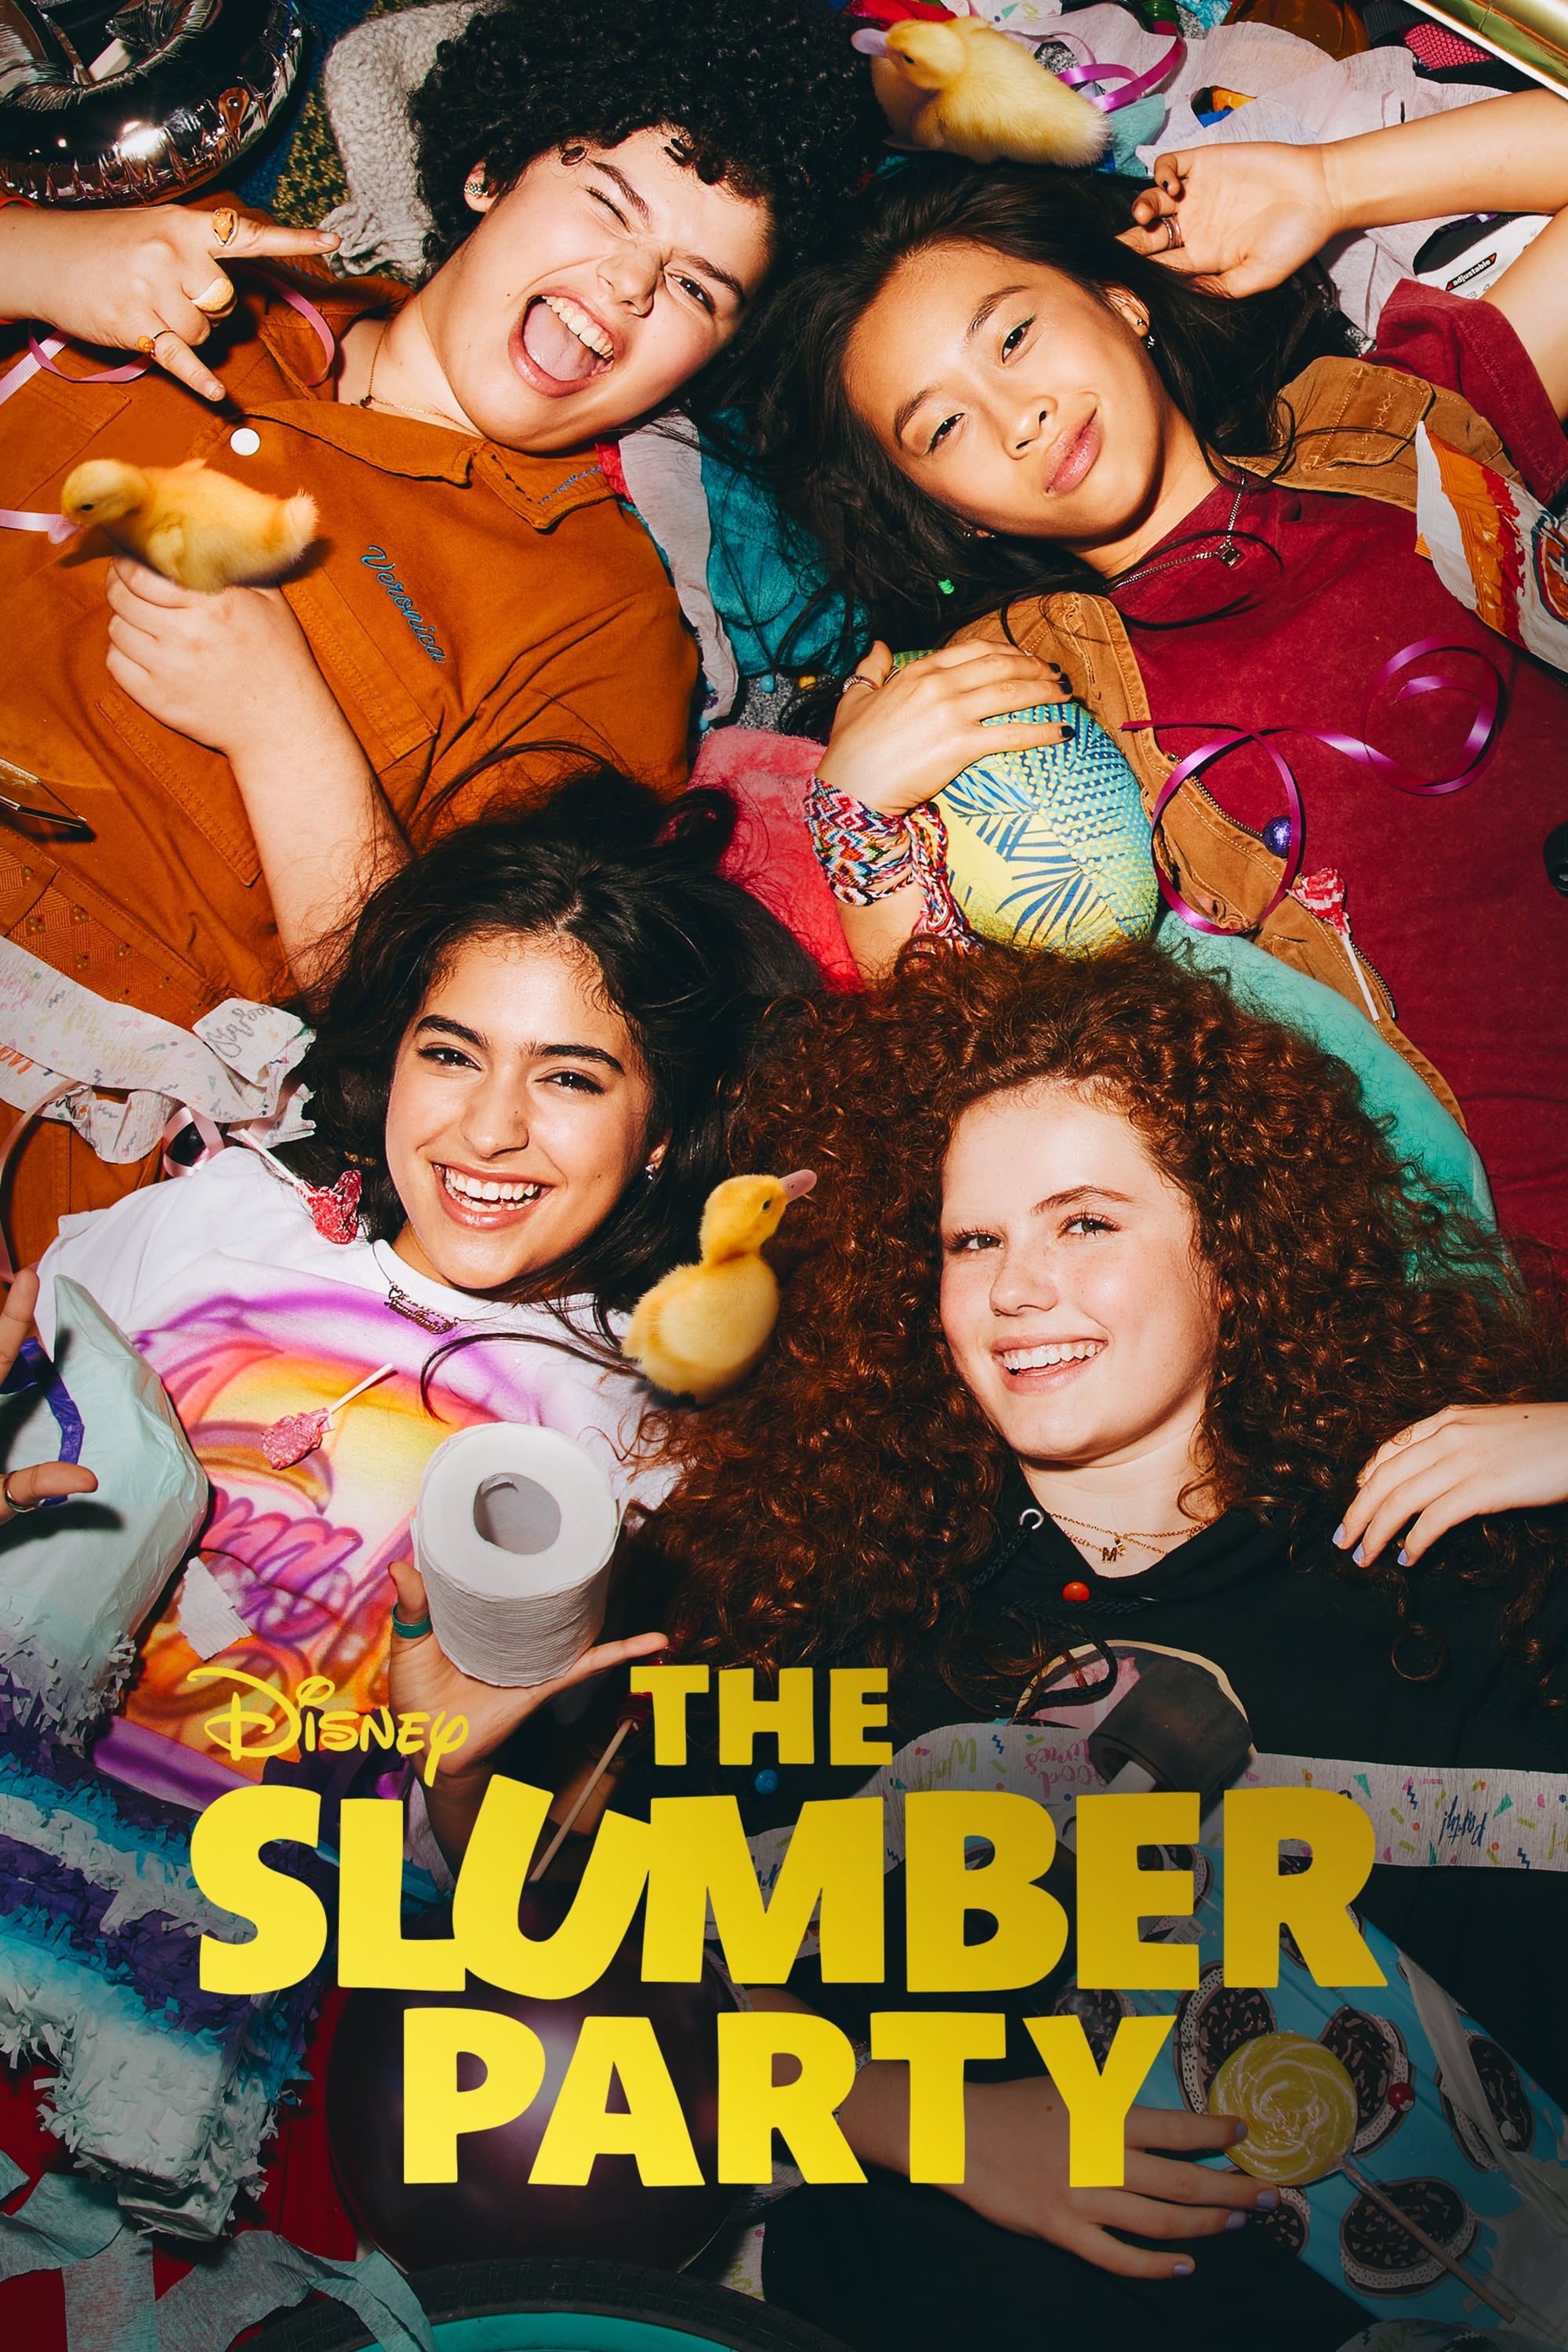 [WATCH 32+] The Slumber Party (2023) FULL MOVIE ONLINE FREE ENGLISH/Dub/SUB Comedy STREAMINGS ������ Movie Poster